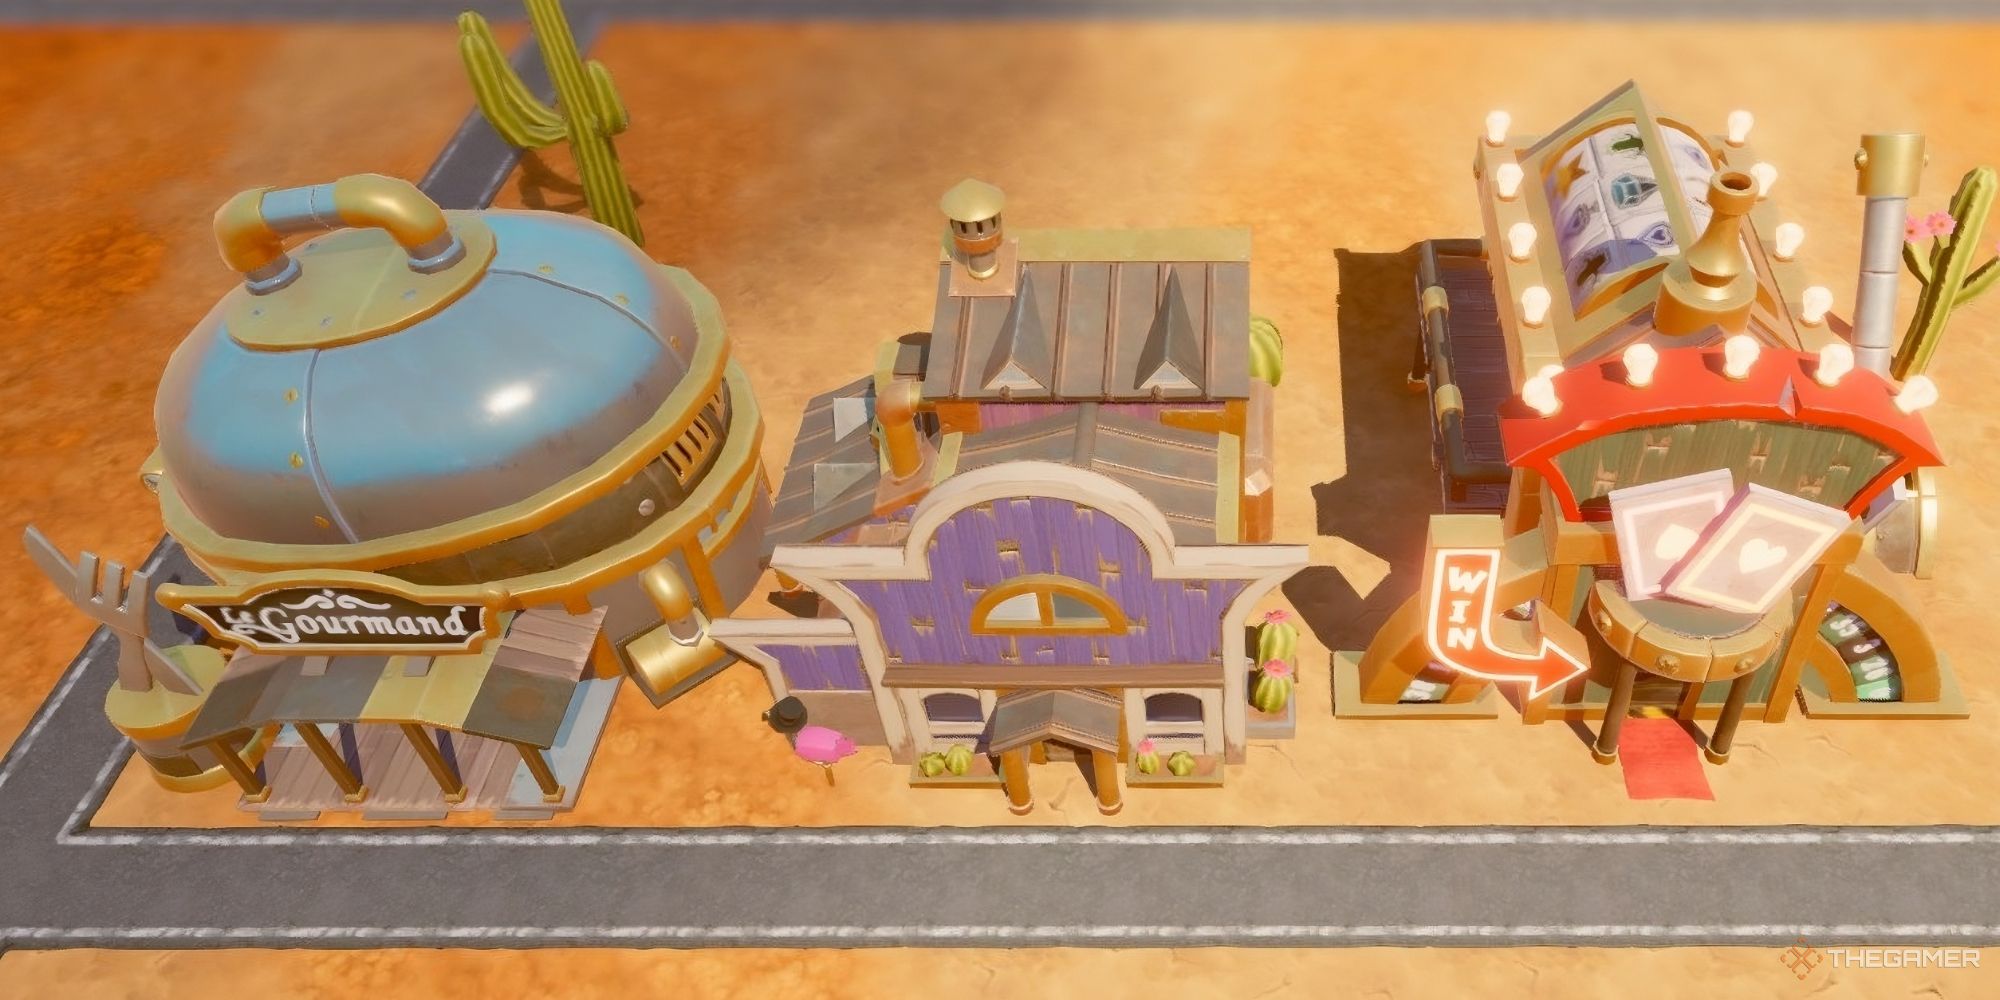 Feature Image showing the Fine Dining Restaurant, Aristobot Residential, and Casino in Steamworld Build